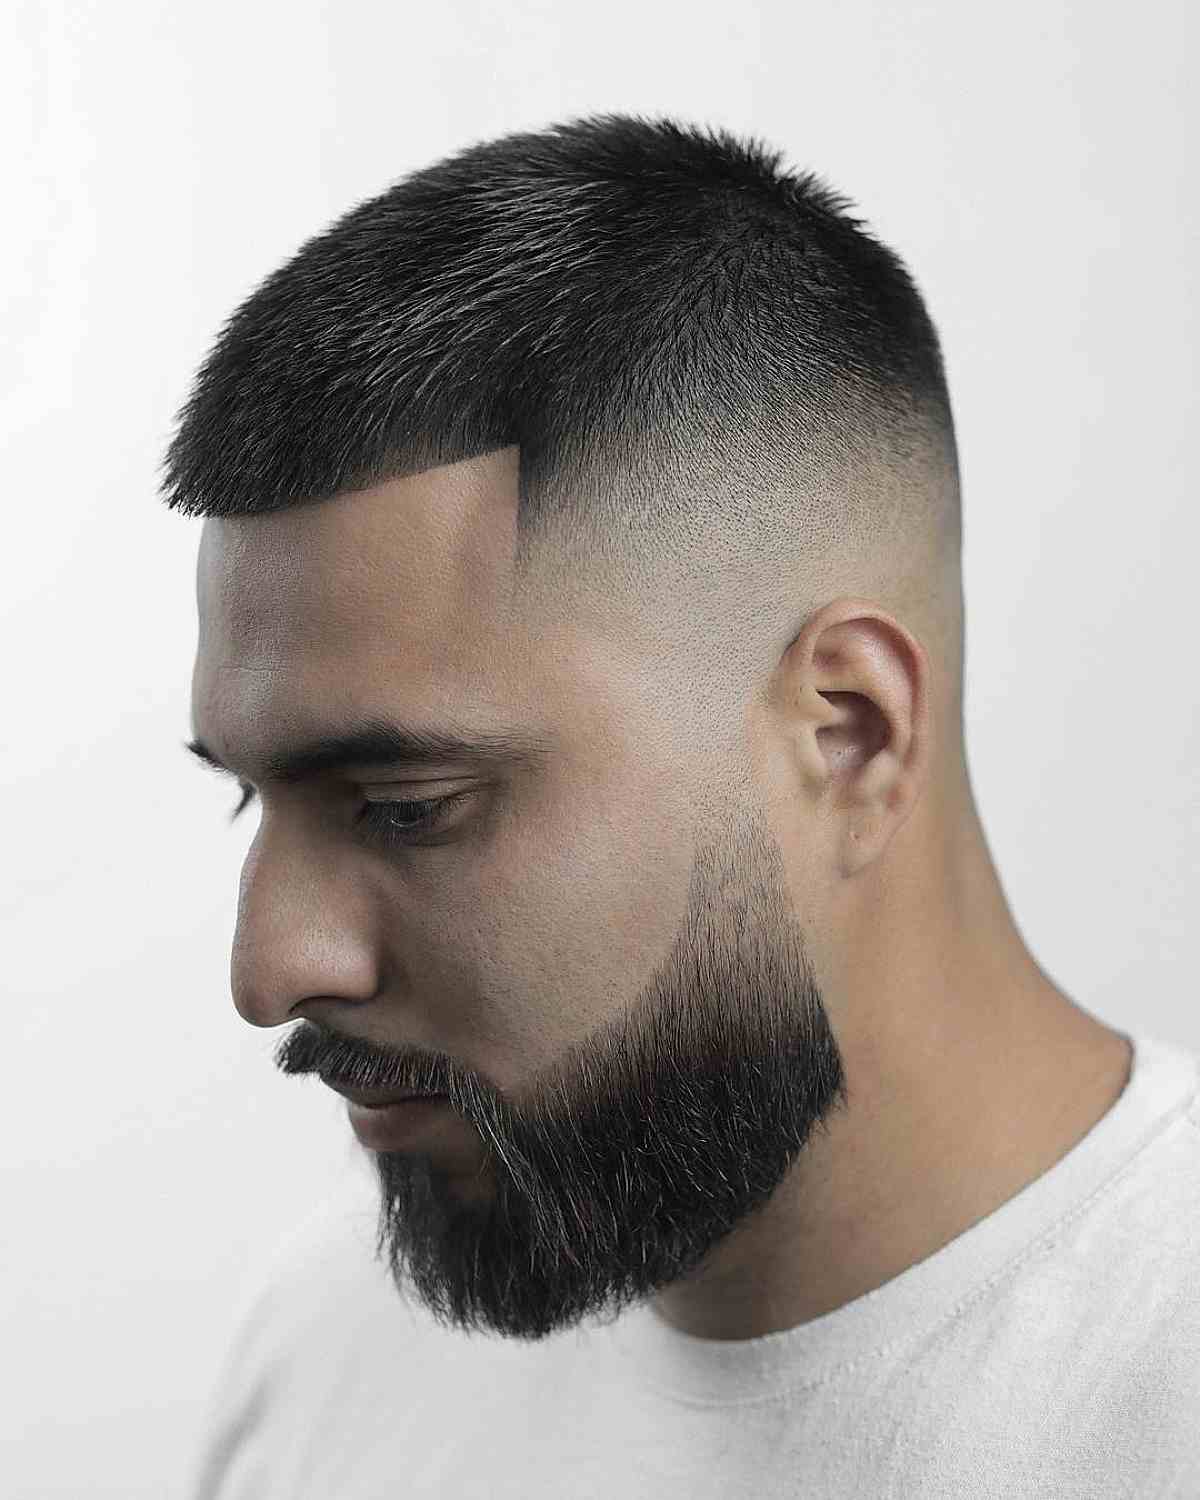 Skin Fade and Razored Edges on Short Hair for Guys